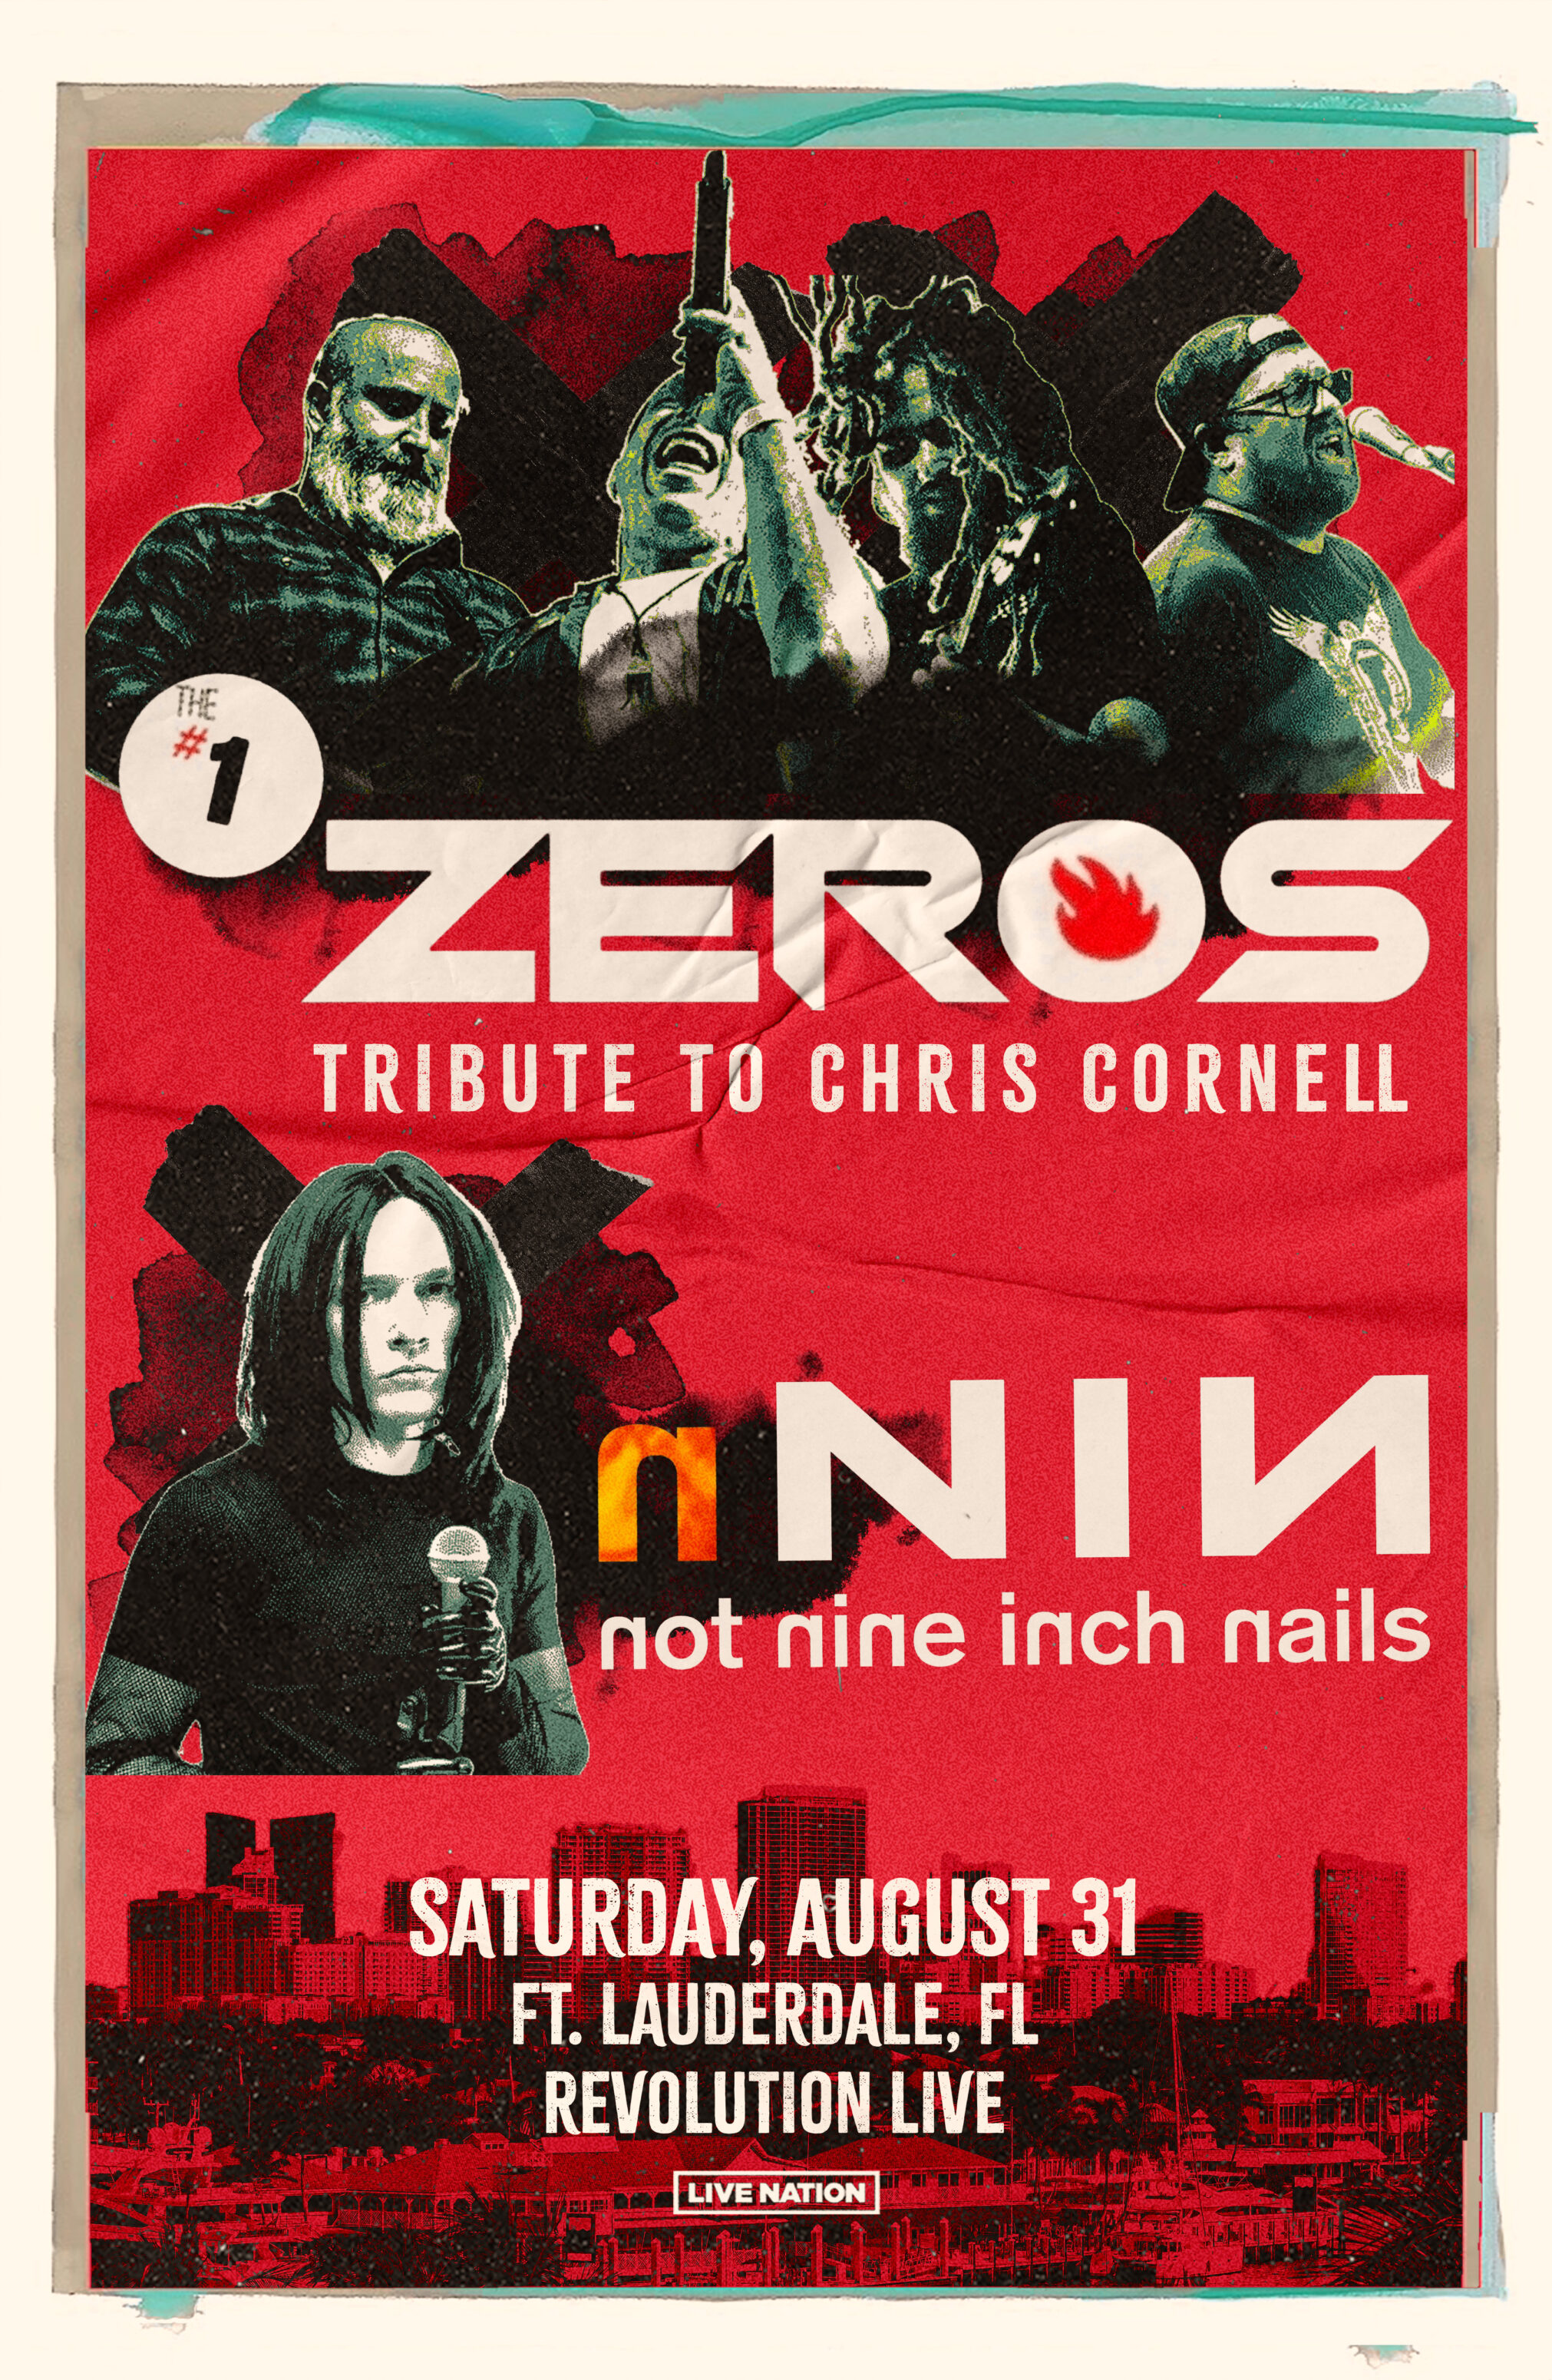 #1 Zeroes Tribute to Chris Cornell and notNine Inch Nails